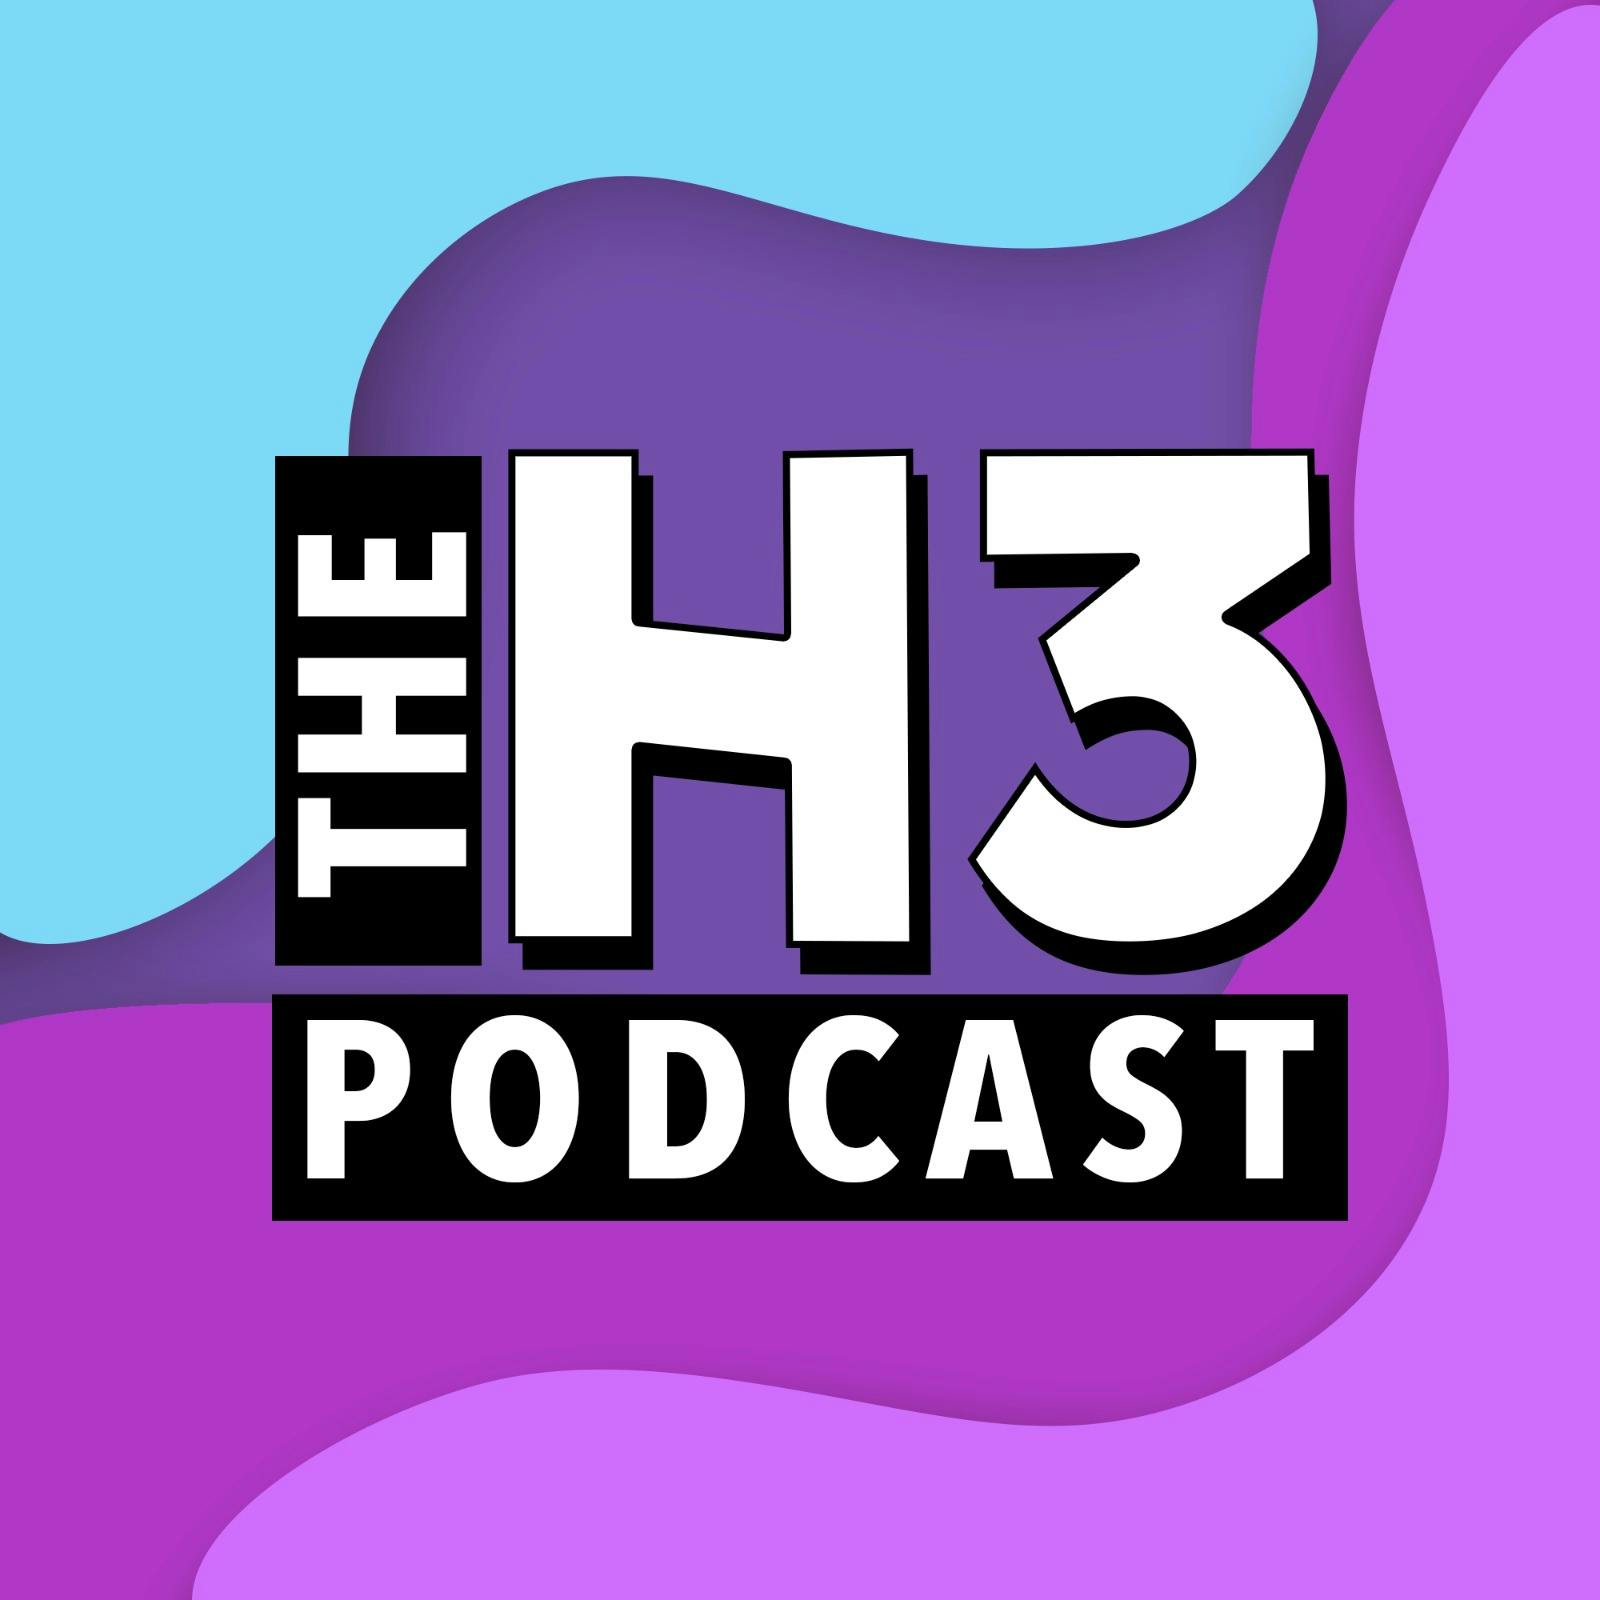 H3 Podcast podcast show image